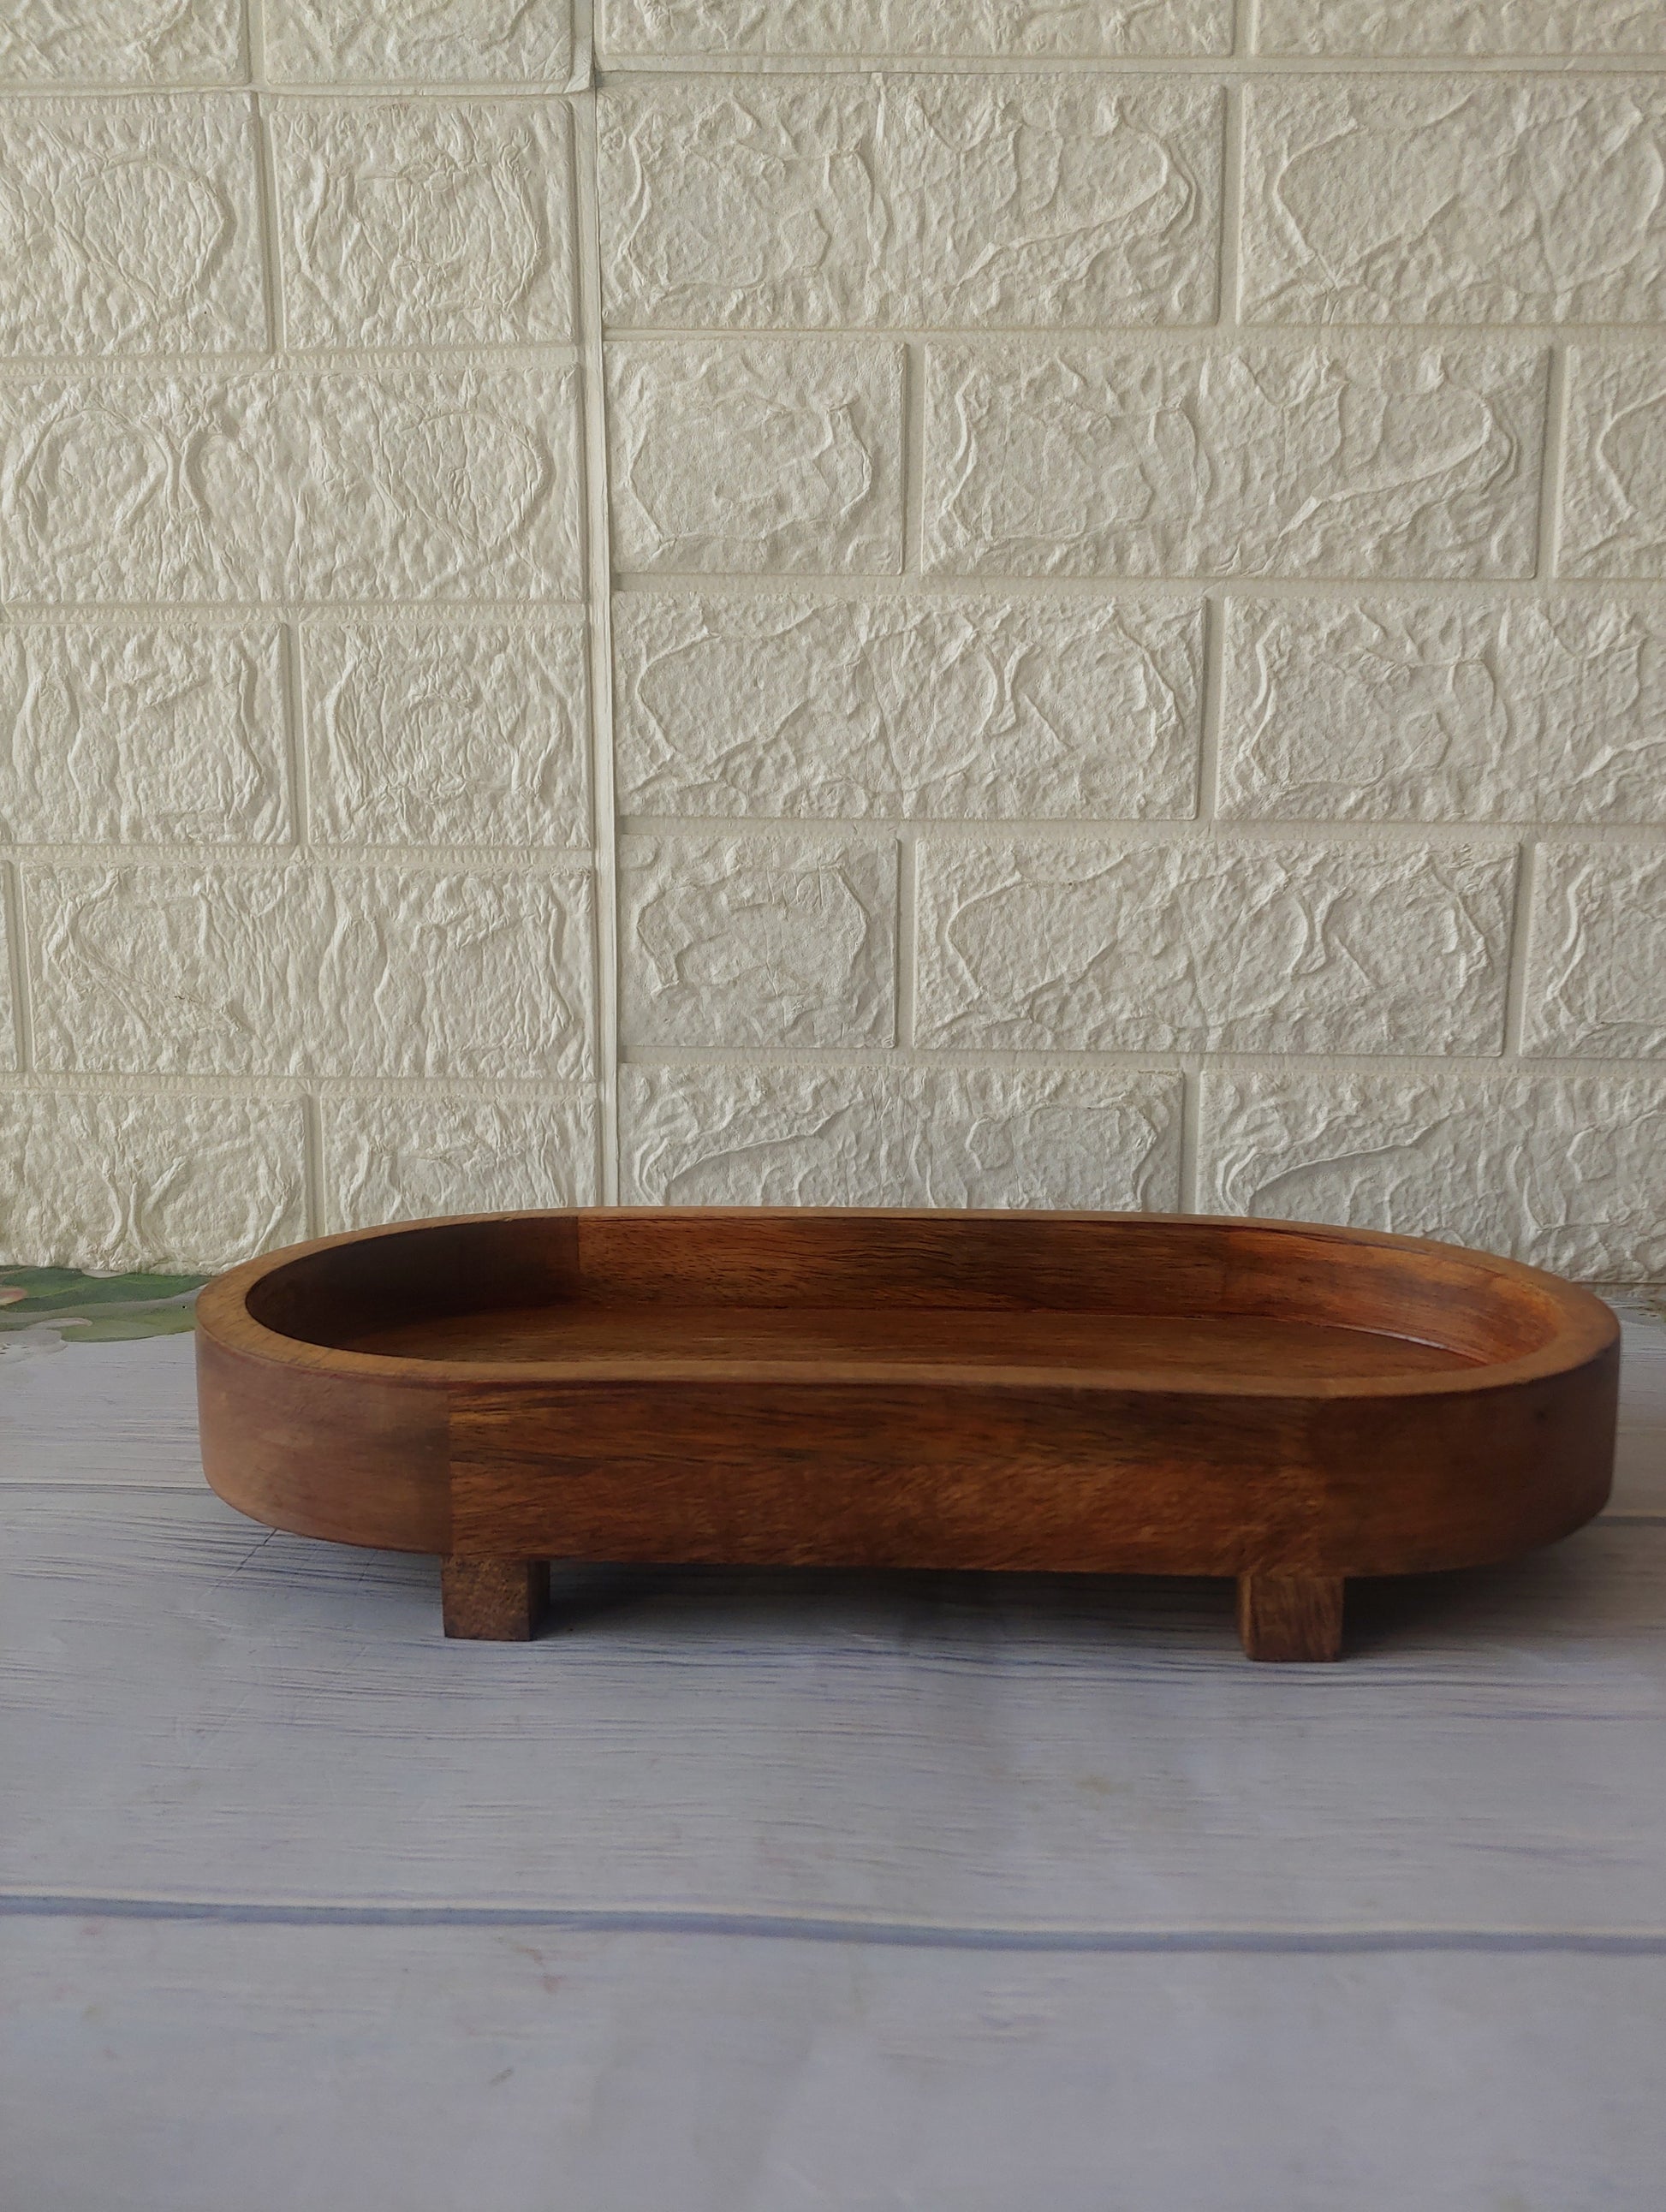 Wooden Decorative  single Tray  13 "inches